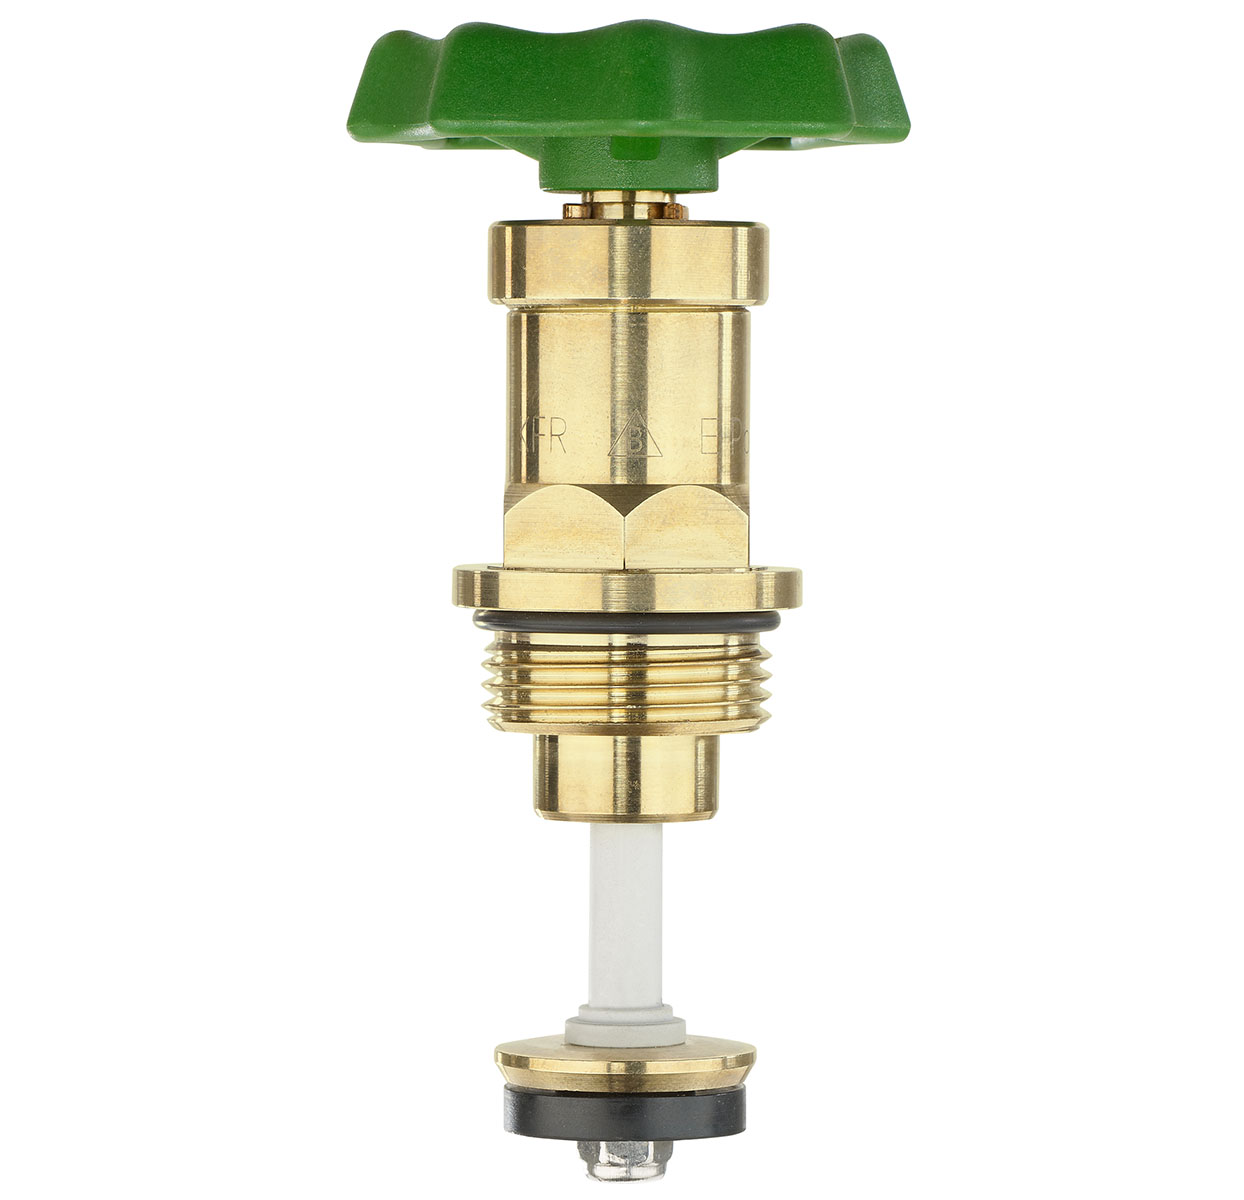 1275150 - Cuphin Upper-part with grease chamber SOFT-drive-system, for Combined Free-flow and Backflow-preventer valves, not-rising spindle